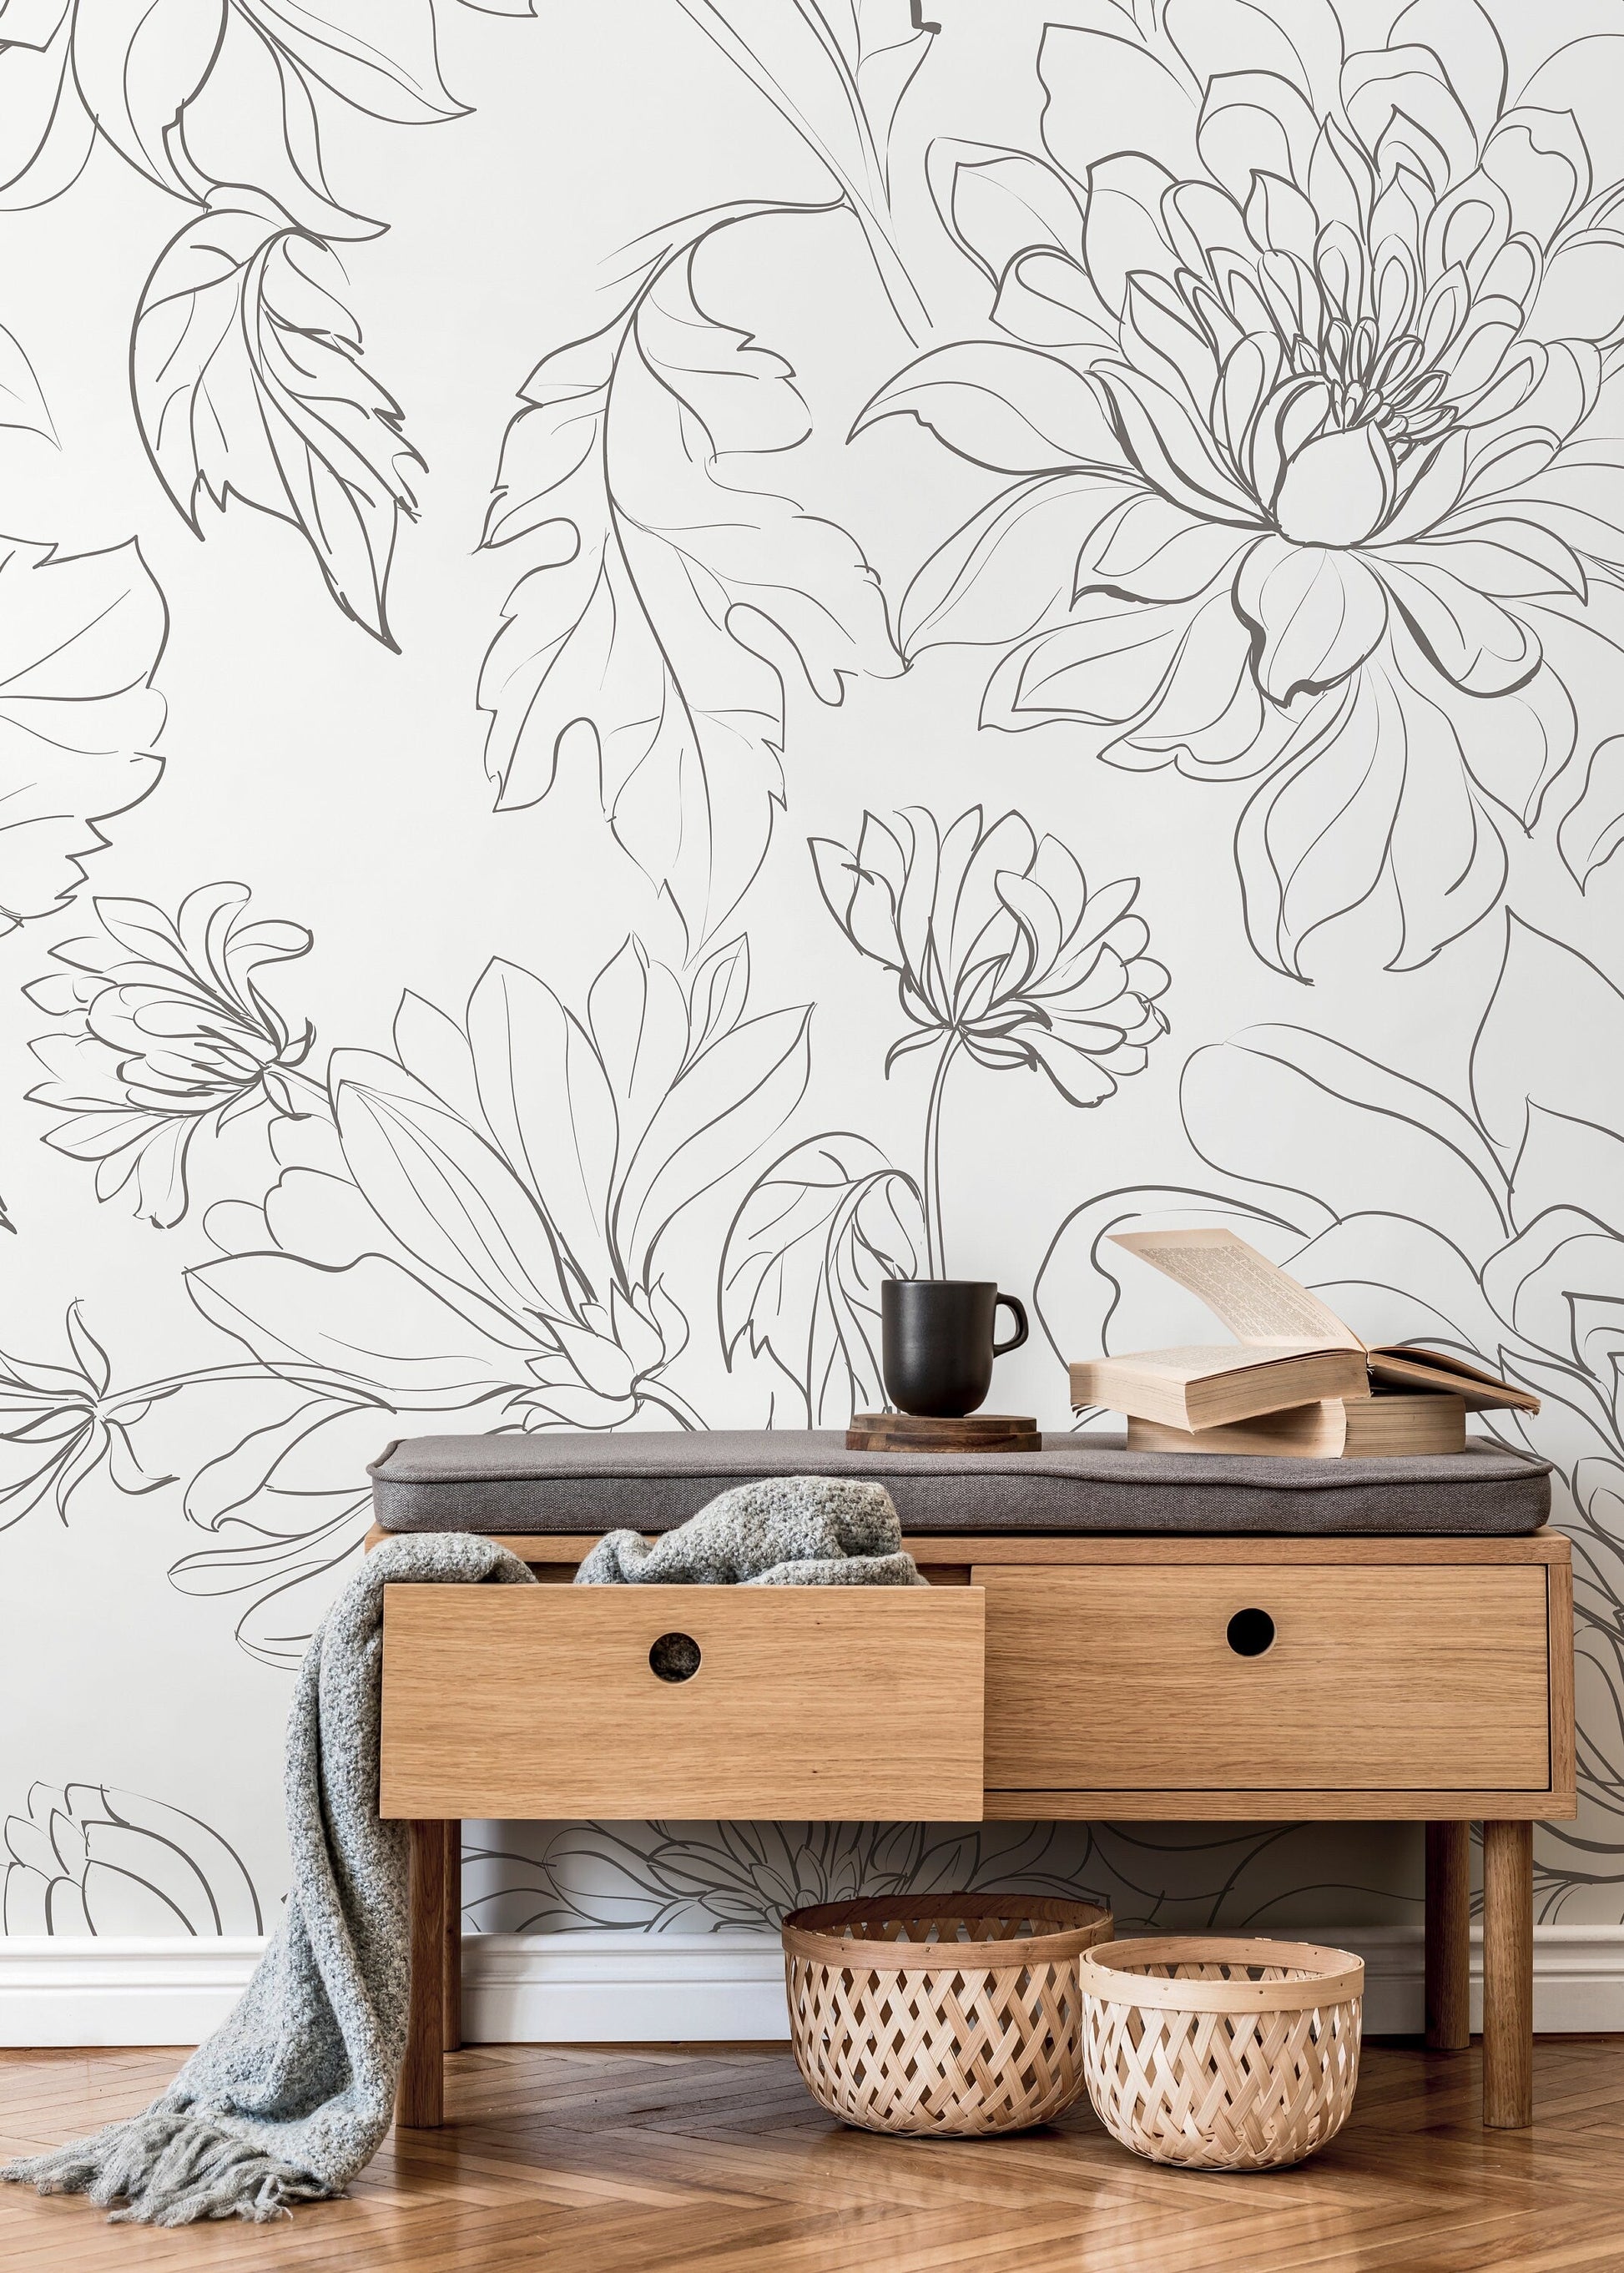 The Minimalist Peony Mural Mural Self Adhesive Large Scale Wallpaper Peony Floral Traditional Pre-pasted or Peel and Stick - ZADO